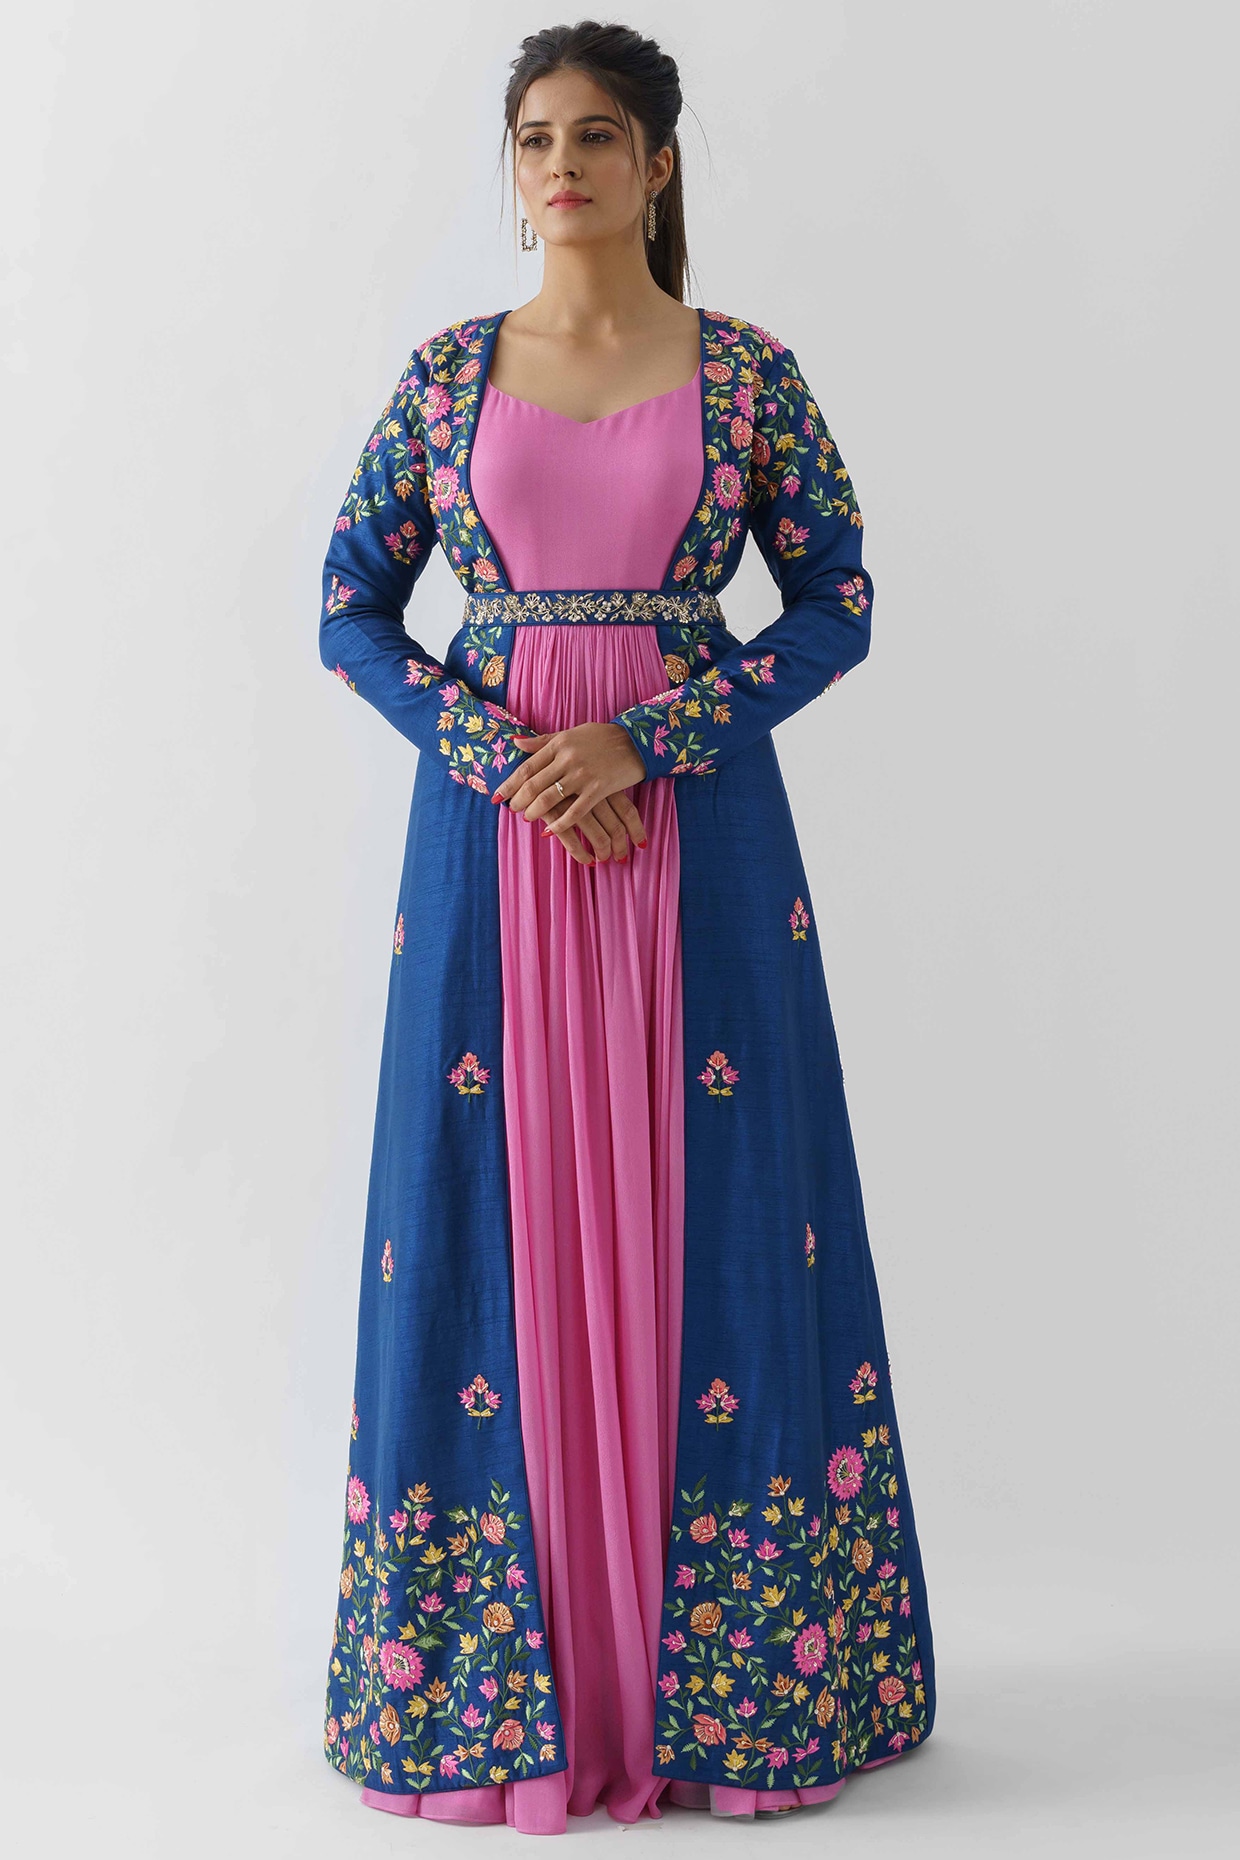 Cotton Ladies Designer Frock With Jacket, Size: M at Rs 425/piece in Chennai